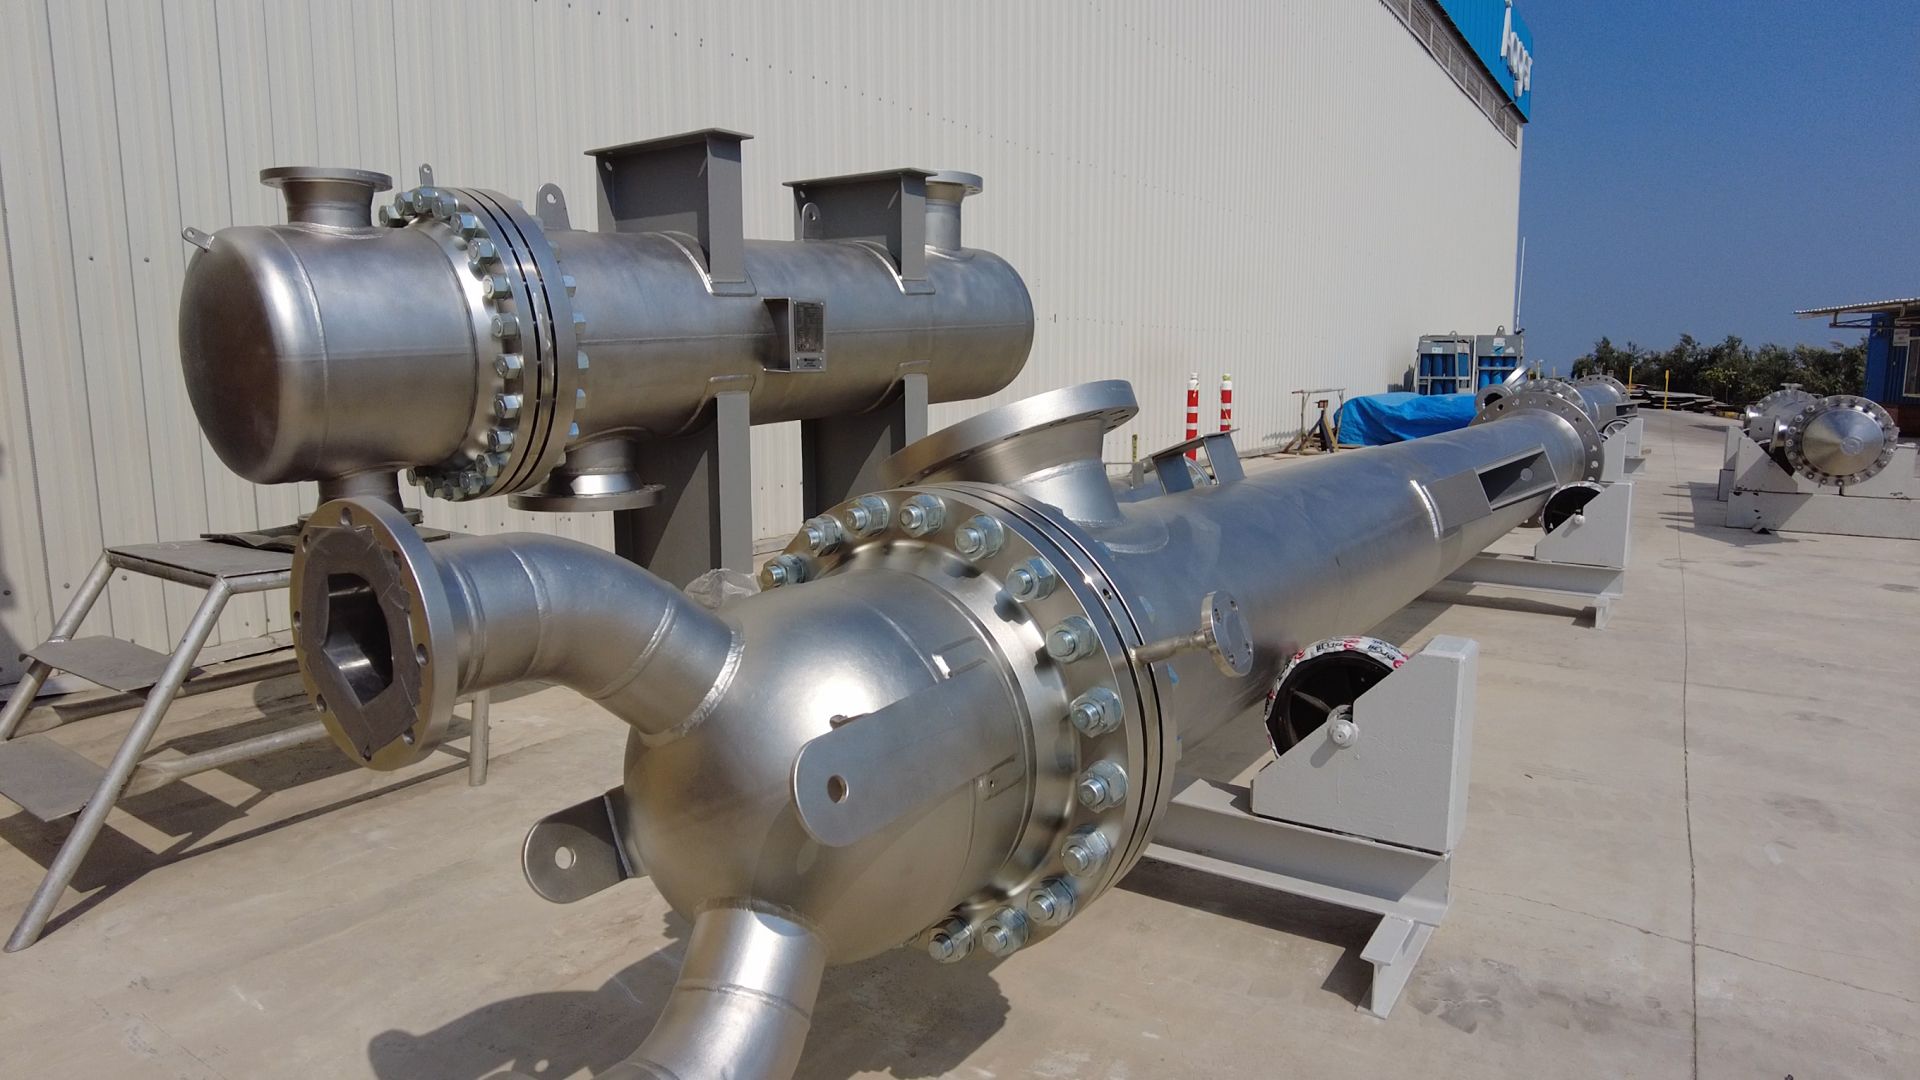 ERGIL team successfully completed heat exchanger, condenser, and boiler order for a chemical plant in Turkey